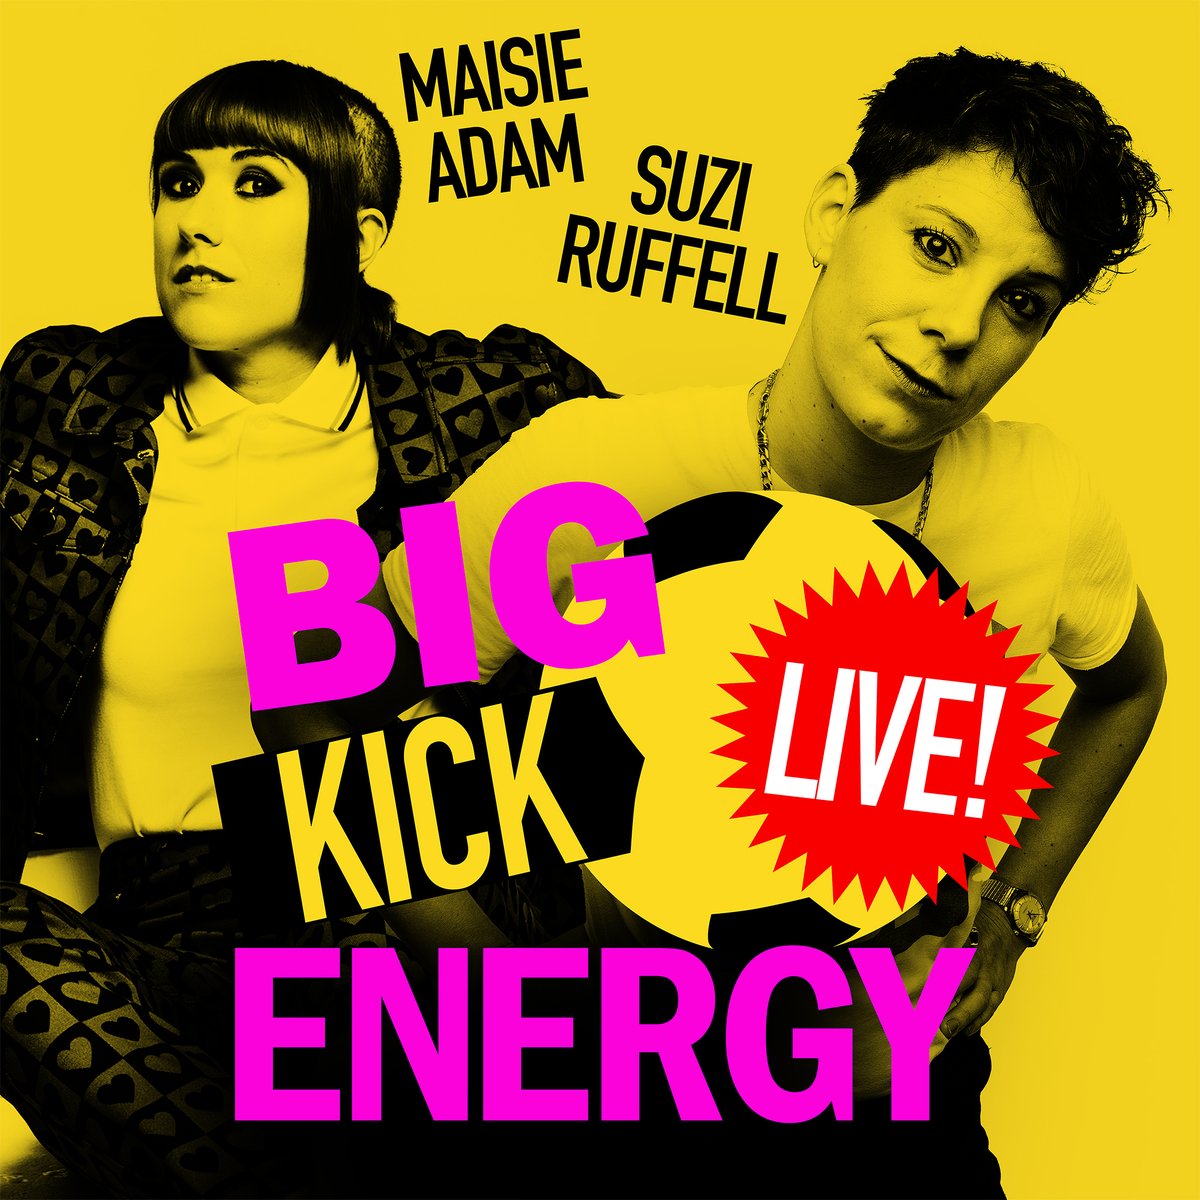 ⚡️Get ready, Big Kick Energy is coming to Liverpool !! Don't miss out on a night of fun, games, merch and much more as @MaisieAdam and Suzi Ruffell bring their podcast Live to Hangar34 Friday 5th April get your tickets NOW: tinyurl.com/yjrdy9hx